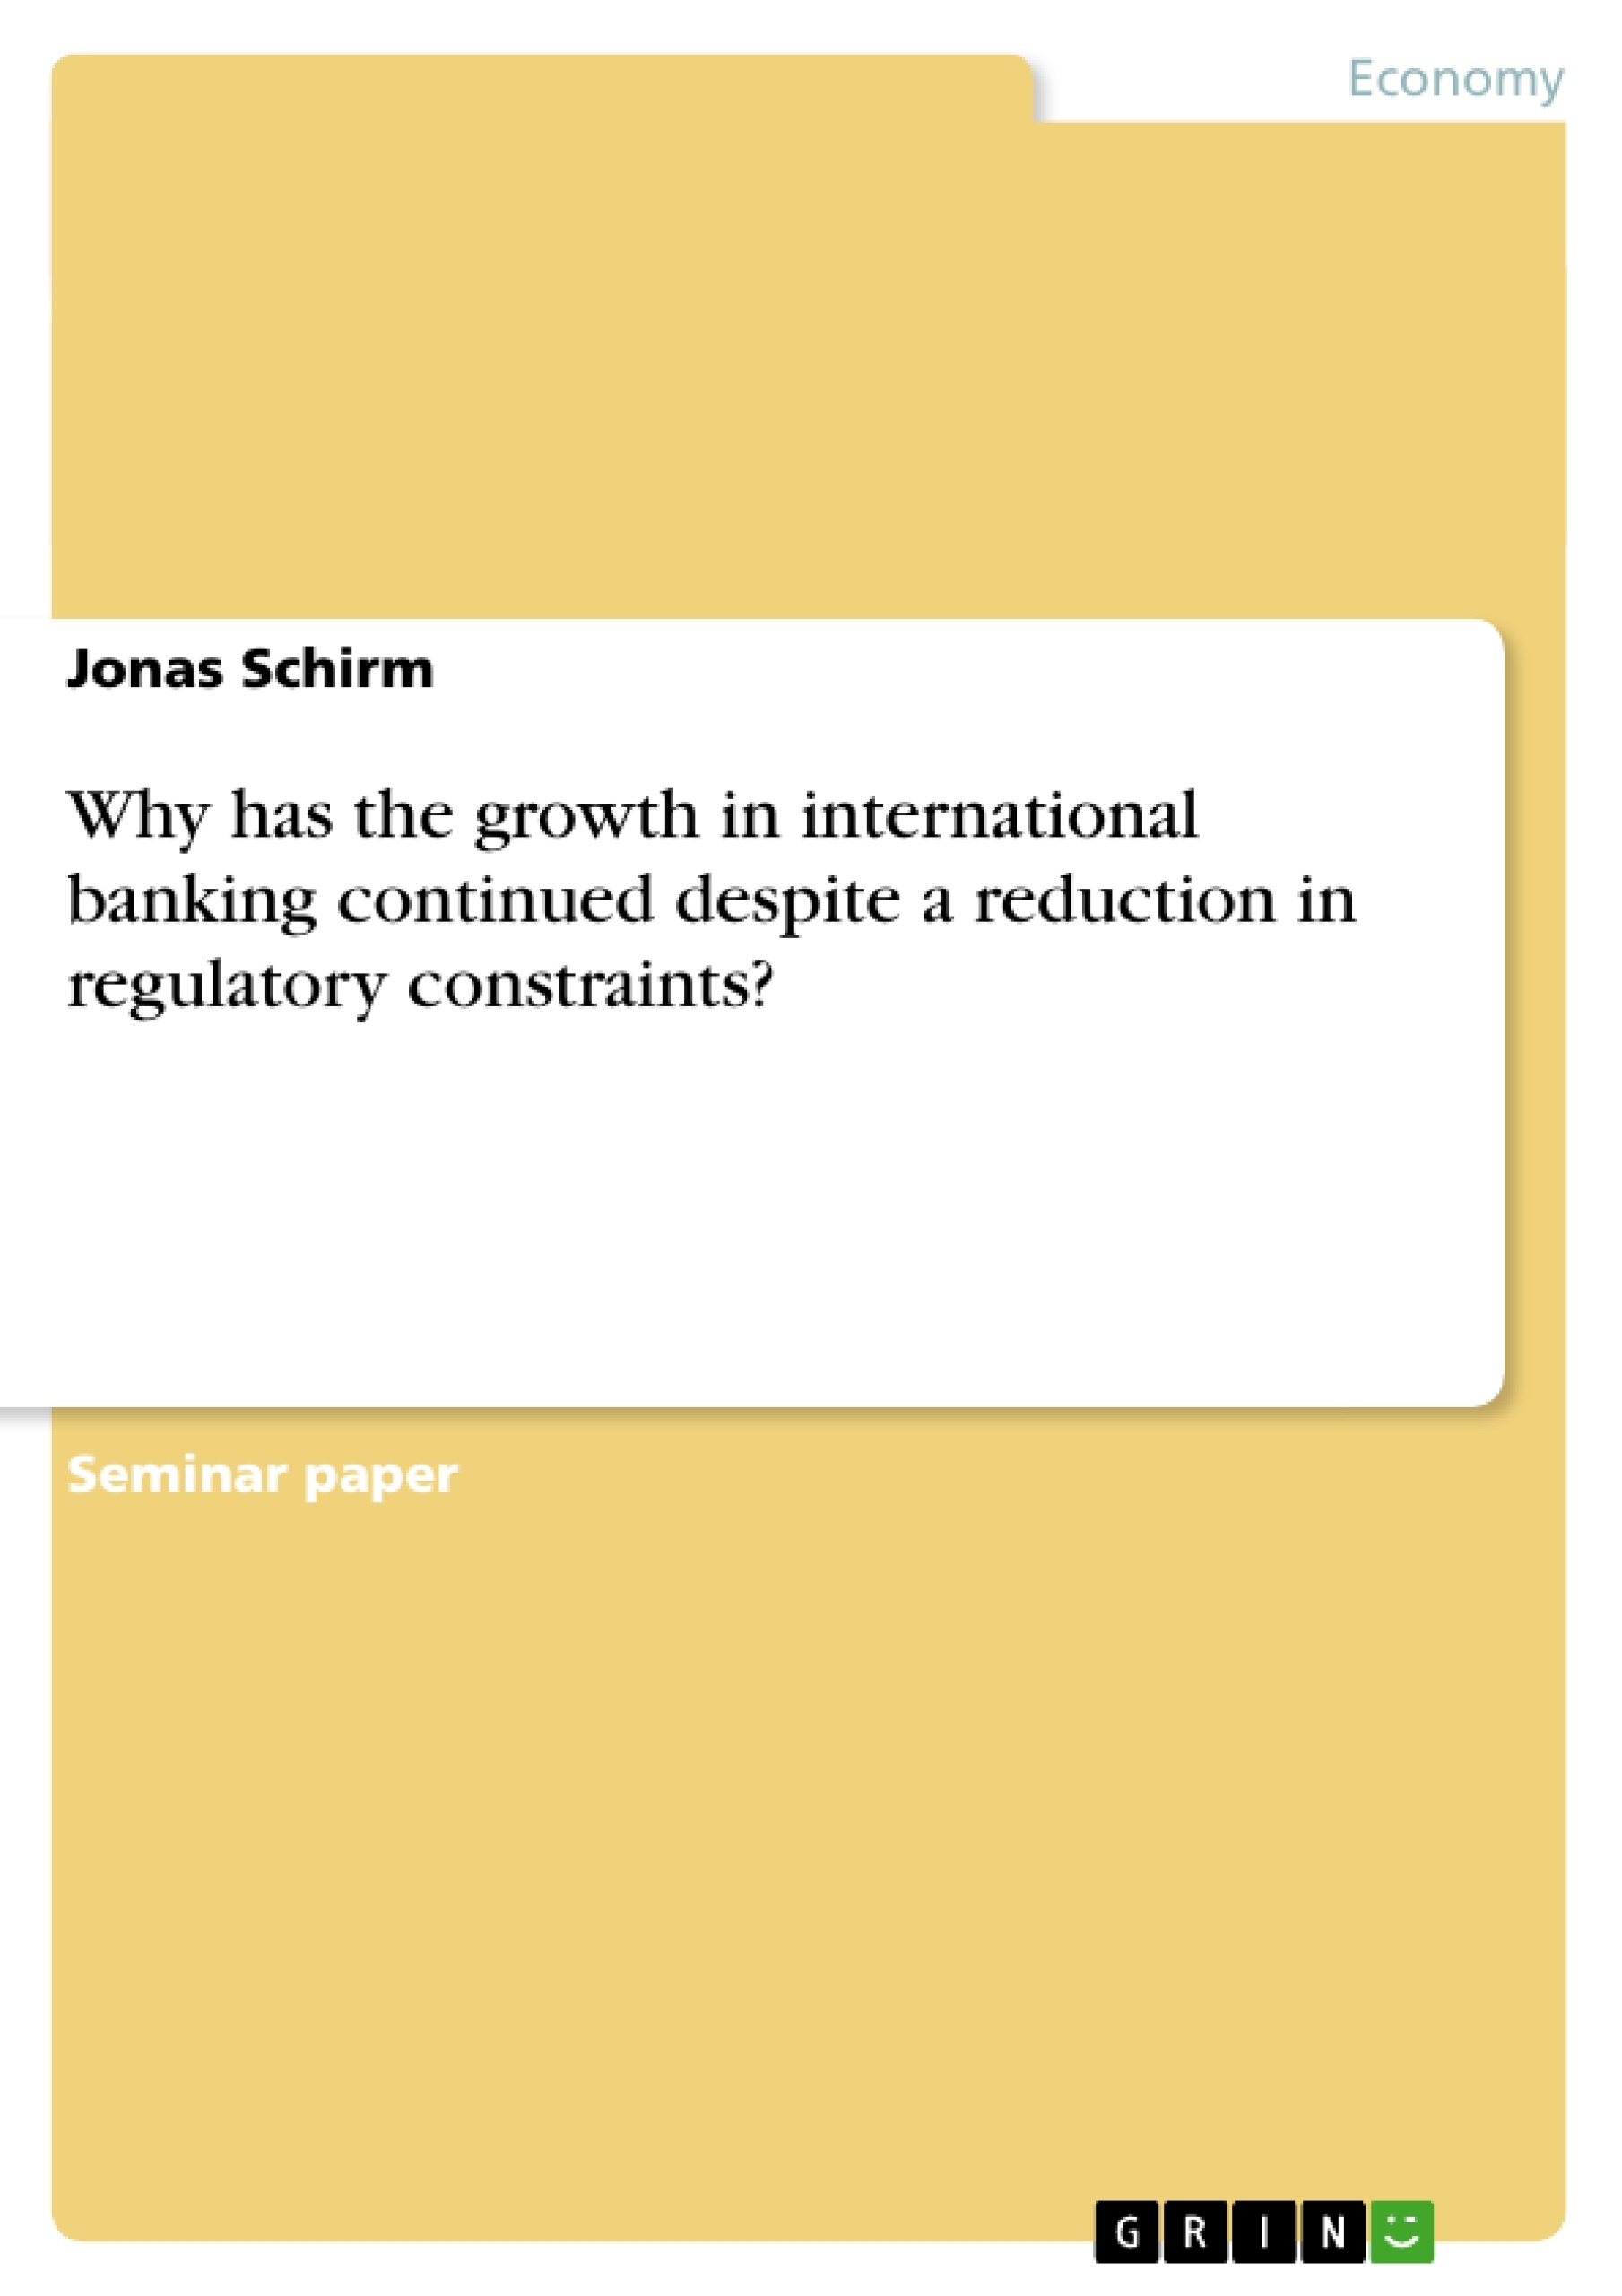 Title: Why has the growth in international banking continued despite a reduction in regulatory constraints?